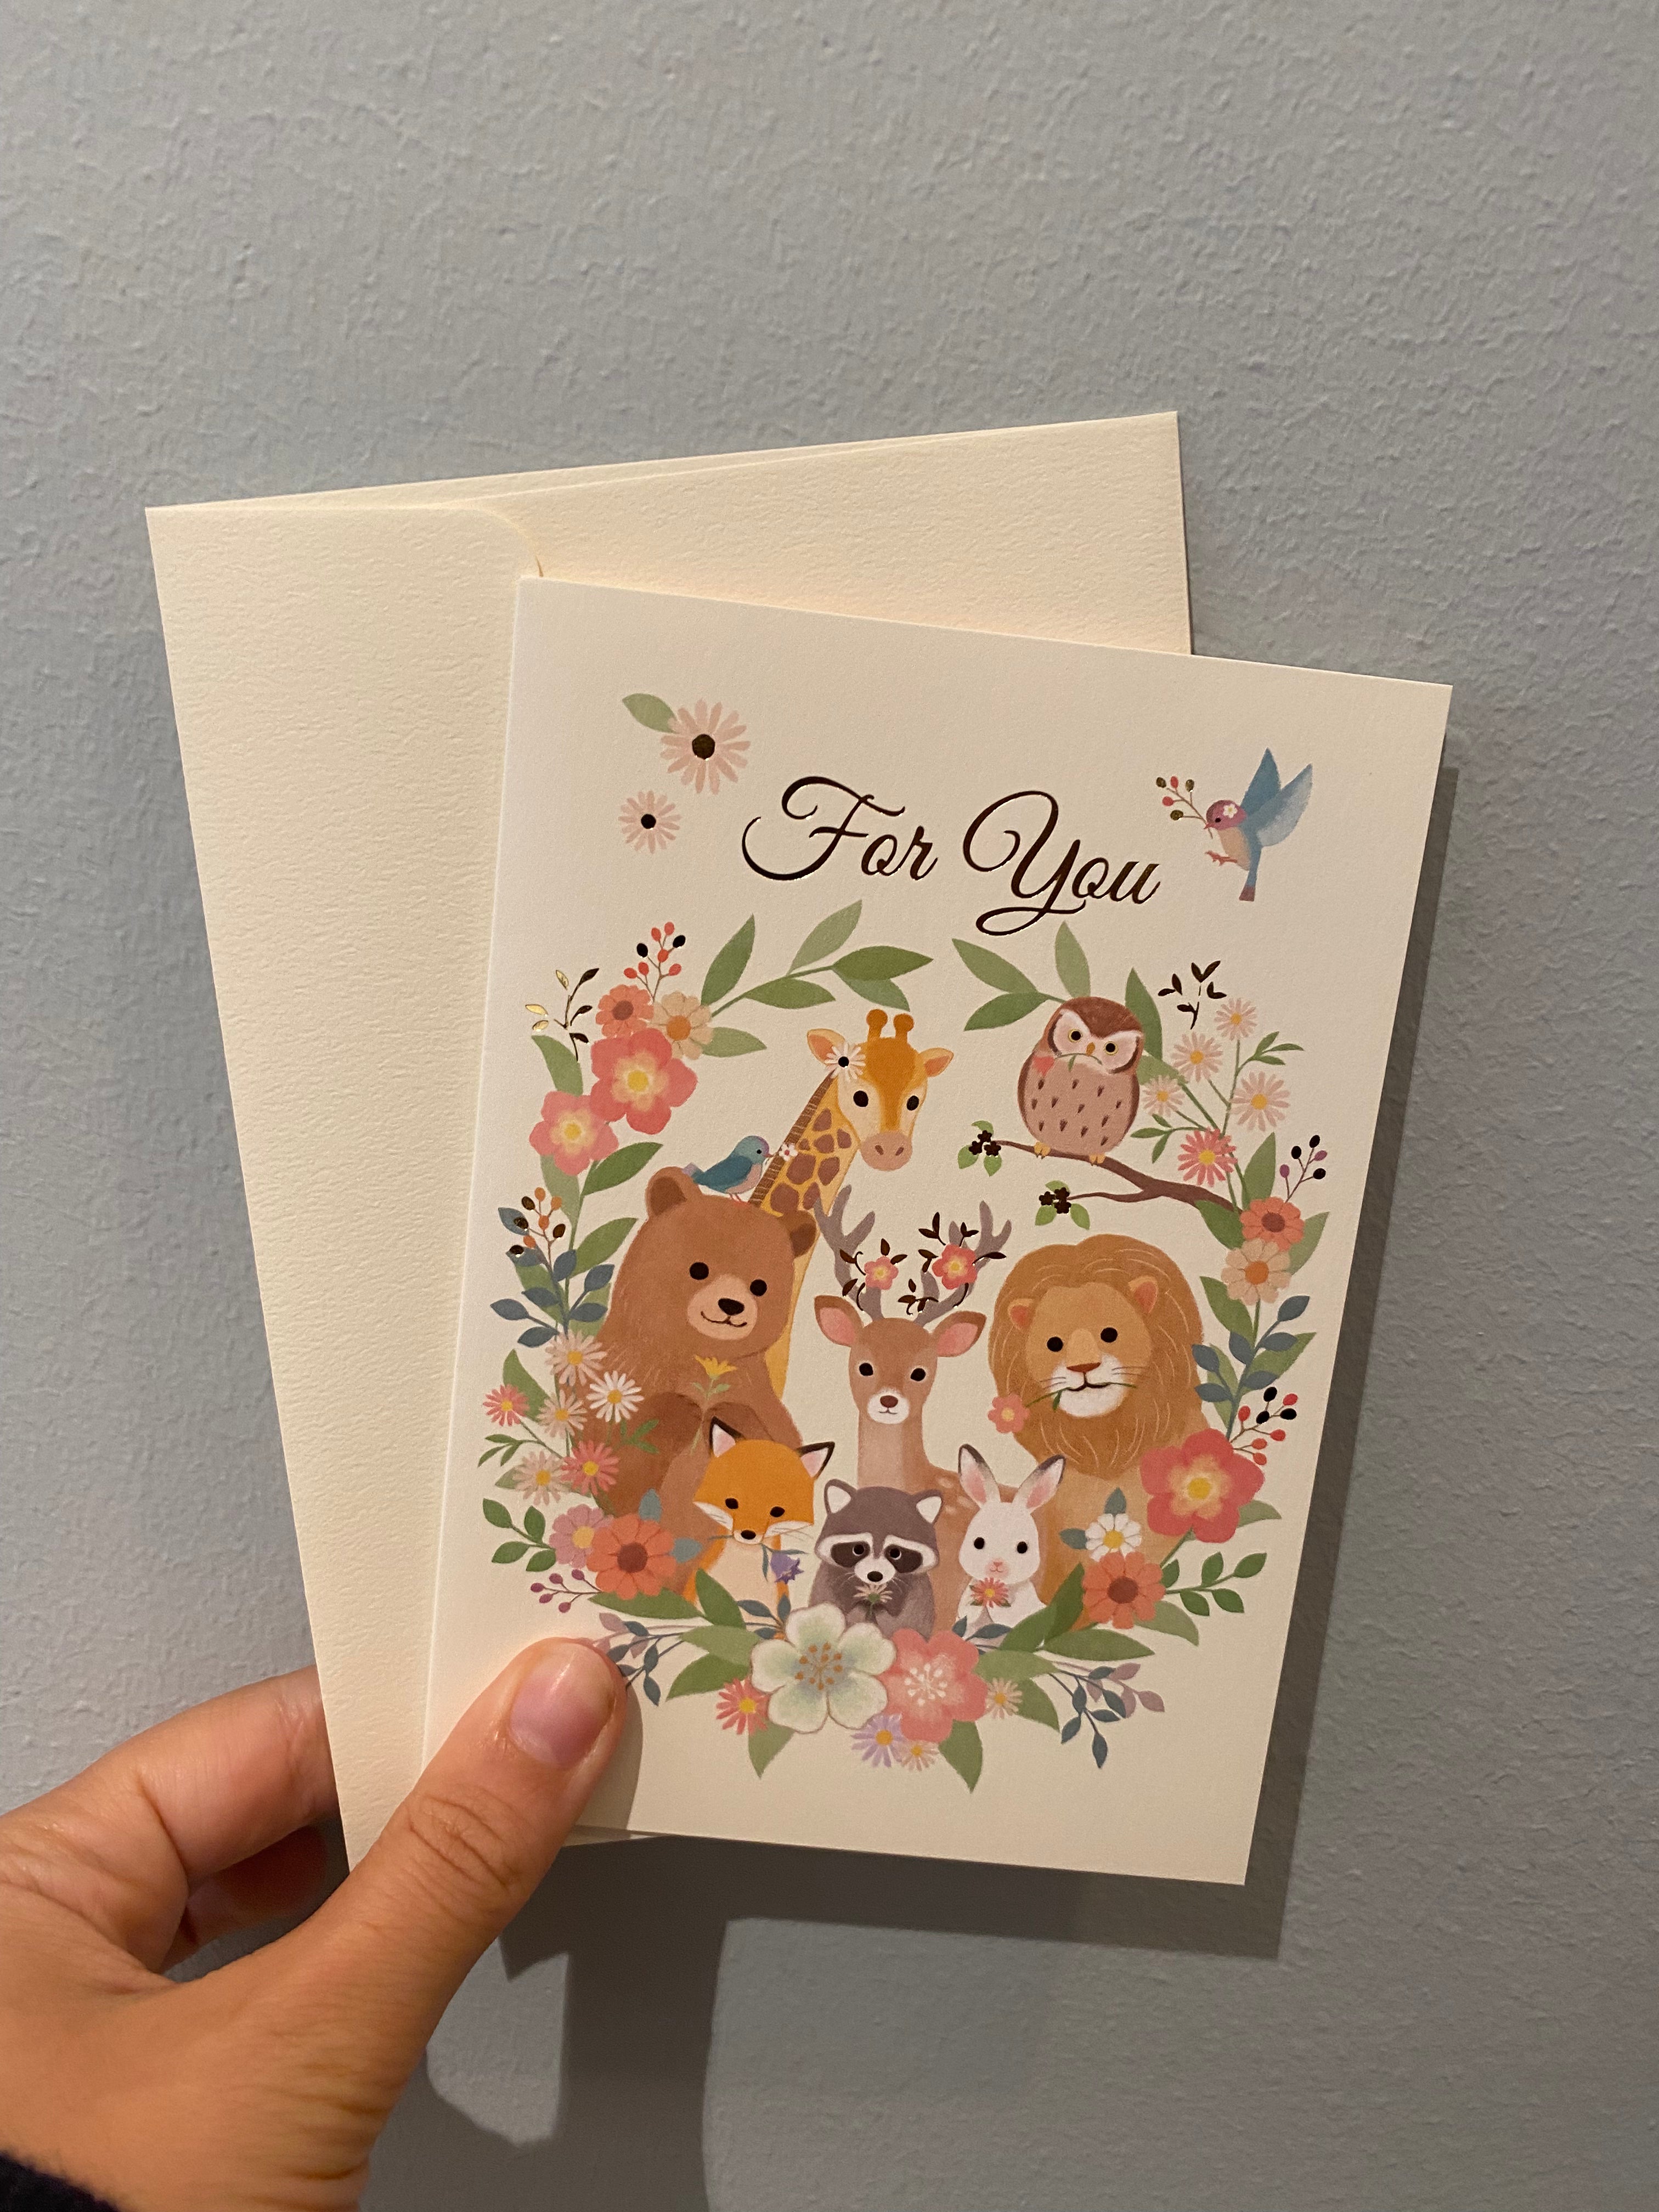 Card with forest animals and "for you" written in gold